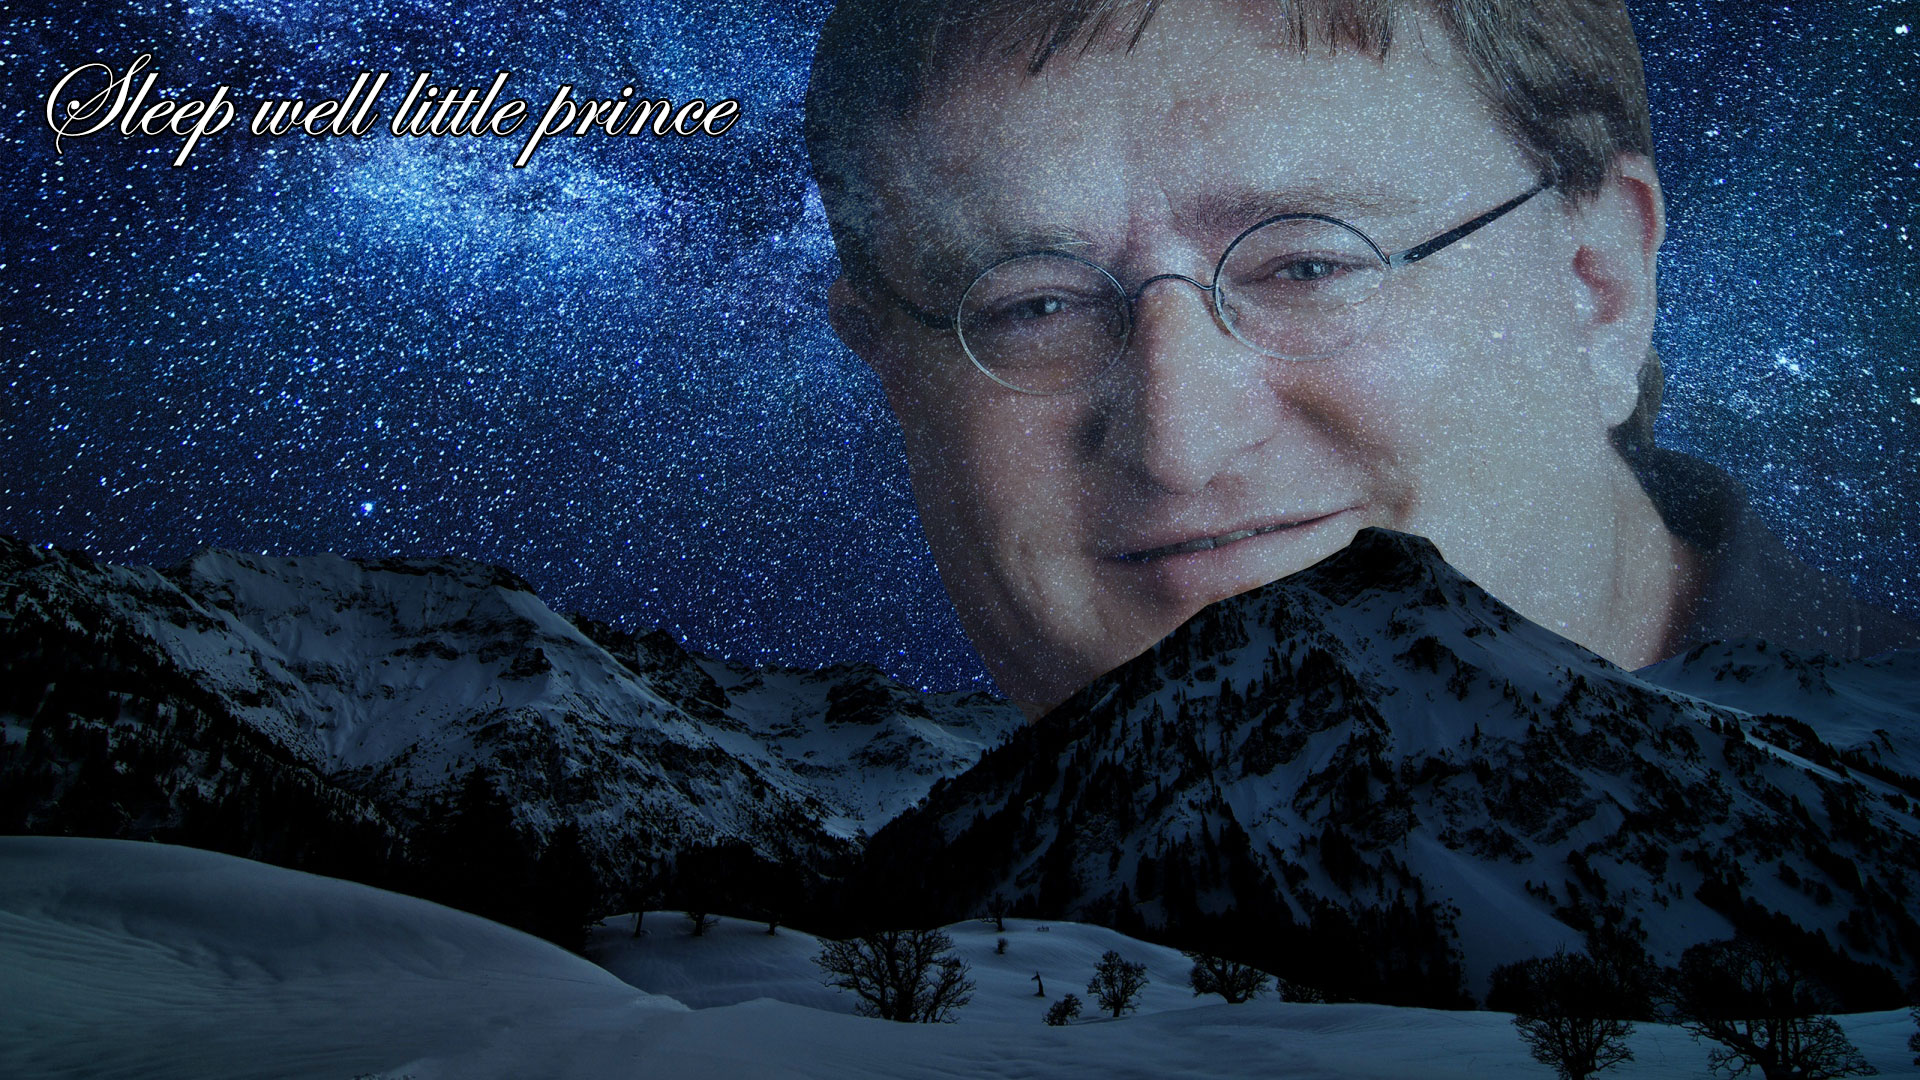 Lord Gaben Wallpaper For all who need a gaben wallpaper pcmasterrace